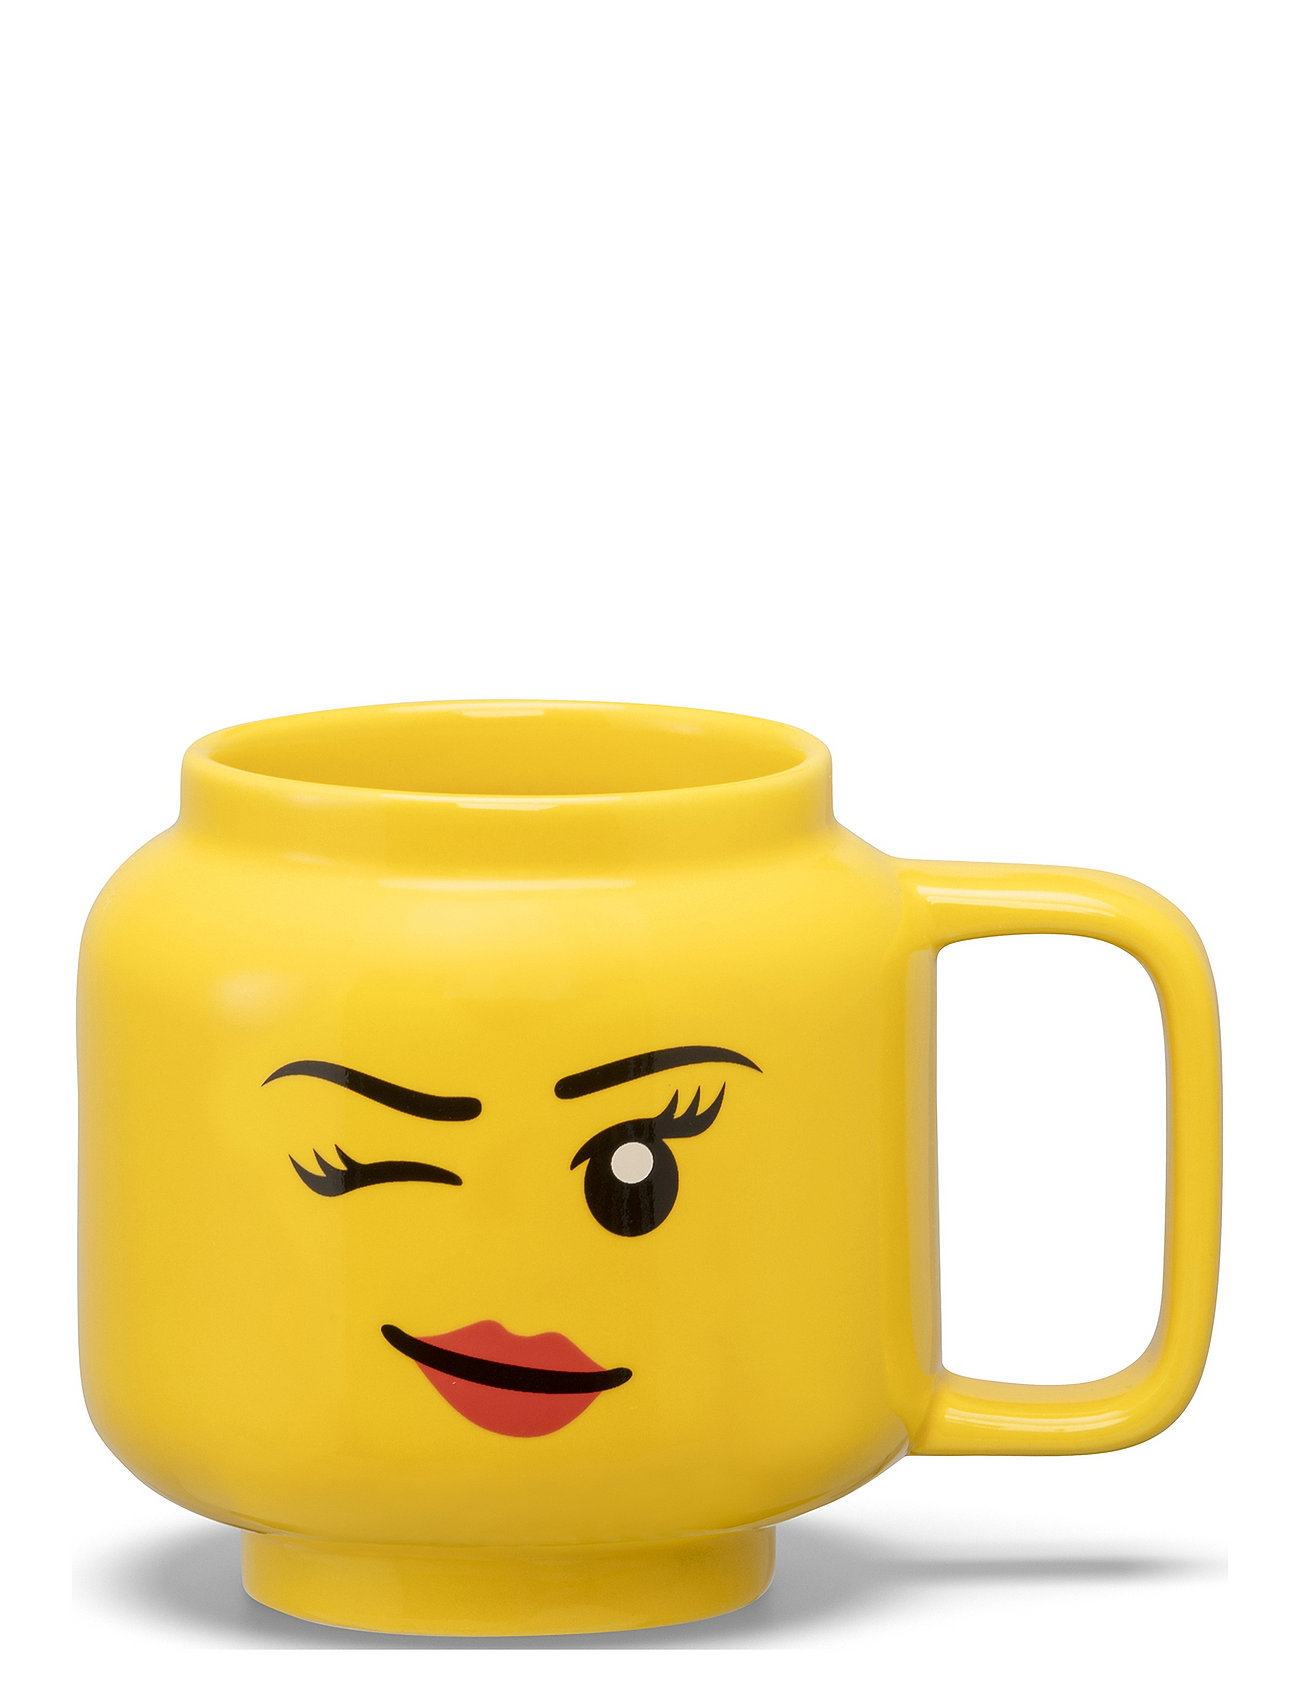 Lego Ceramic Mug Small Winking Girl Home Meal Time Cups & Mugs Cups Yellow LEGO STORAGE